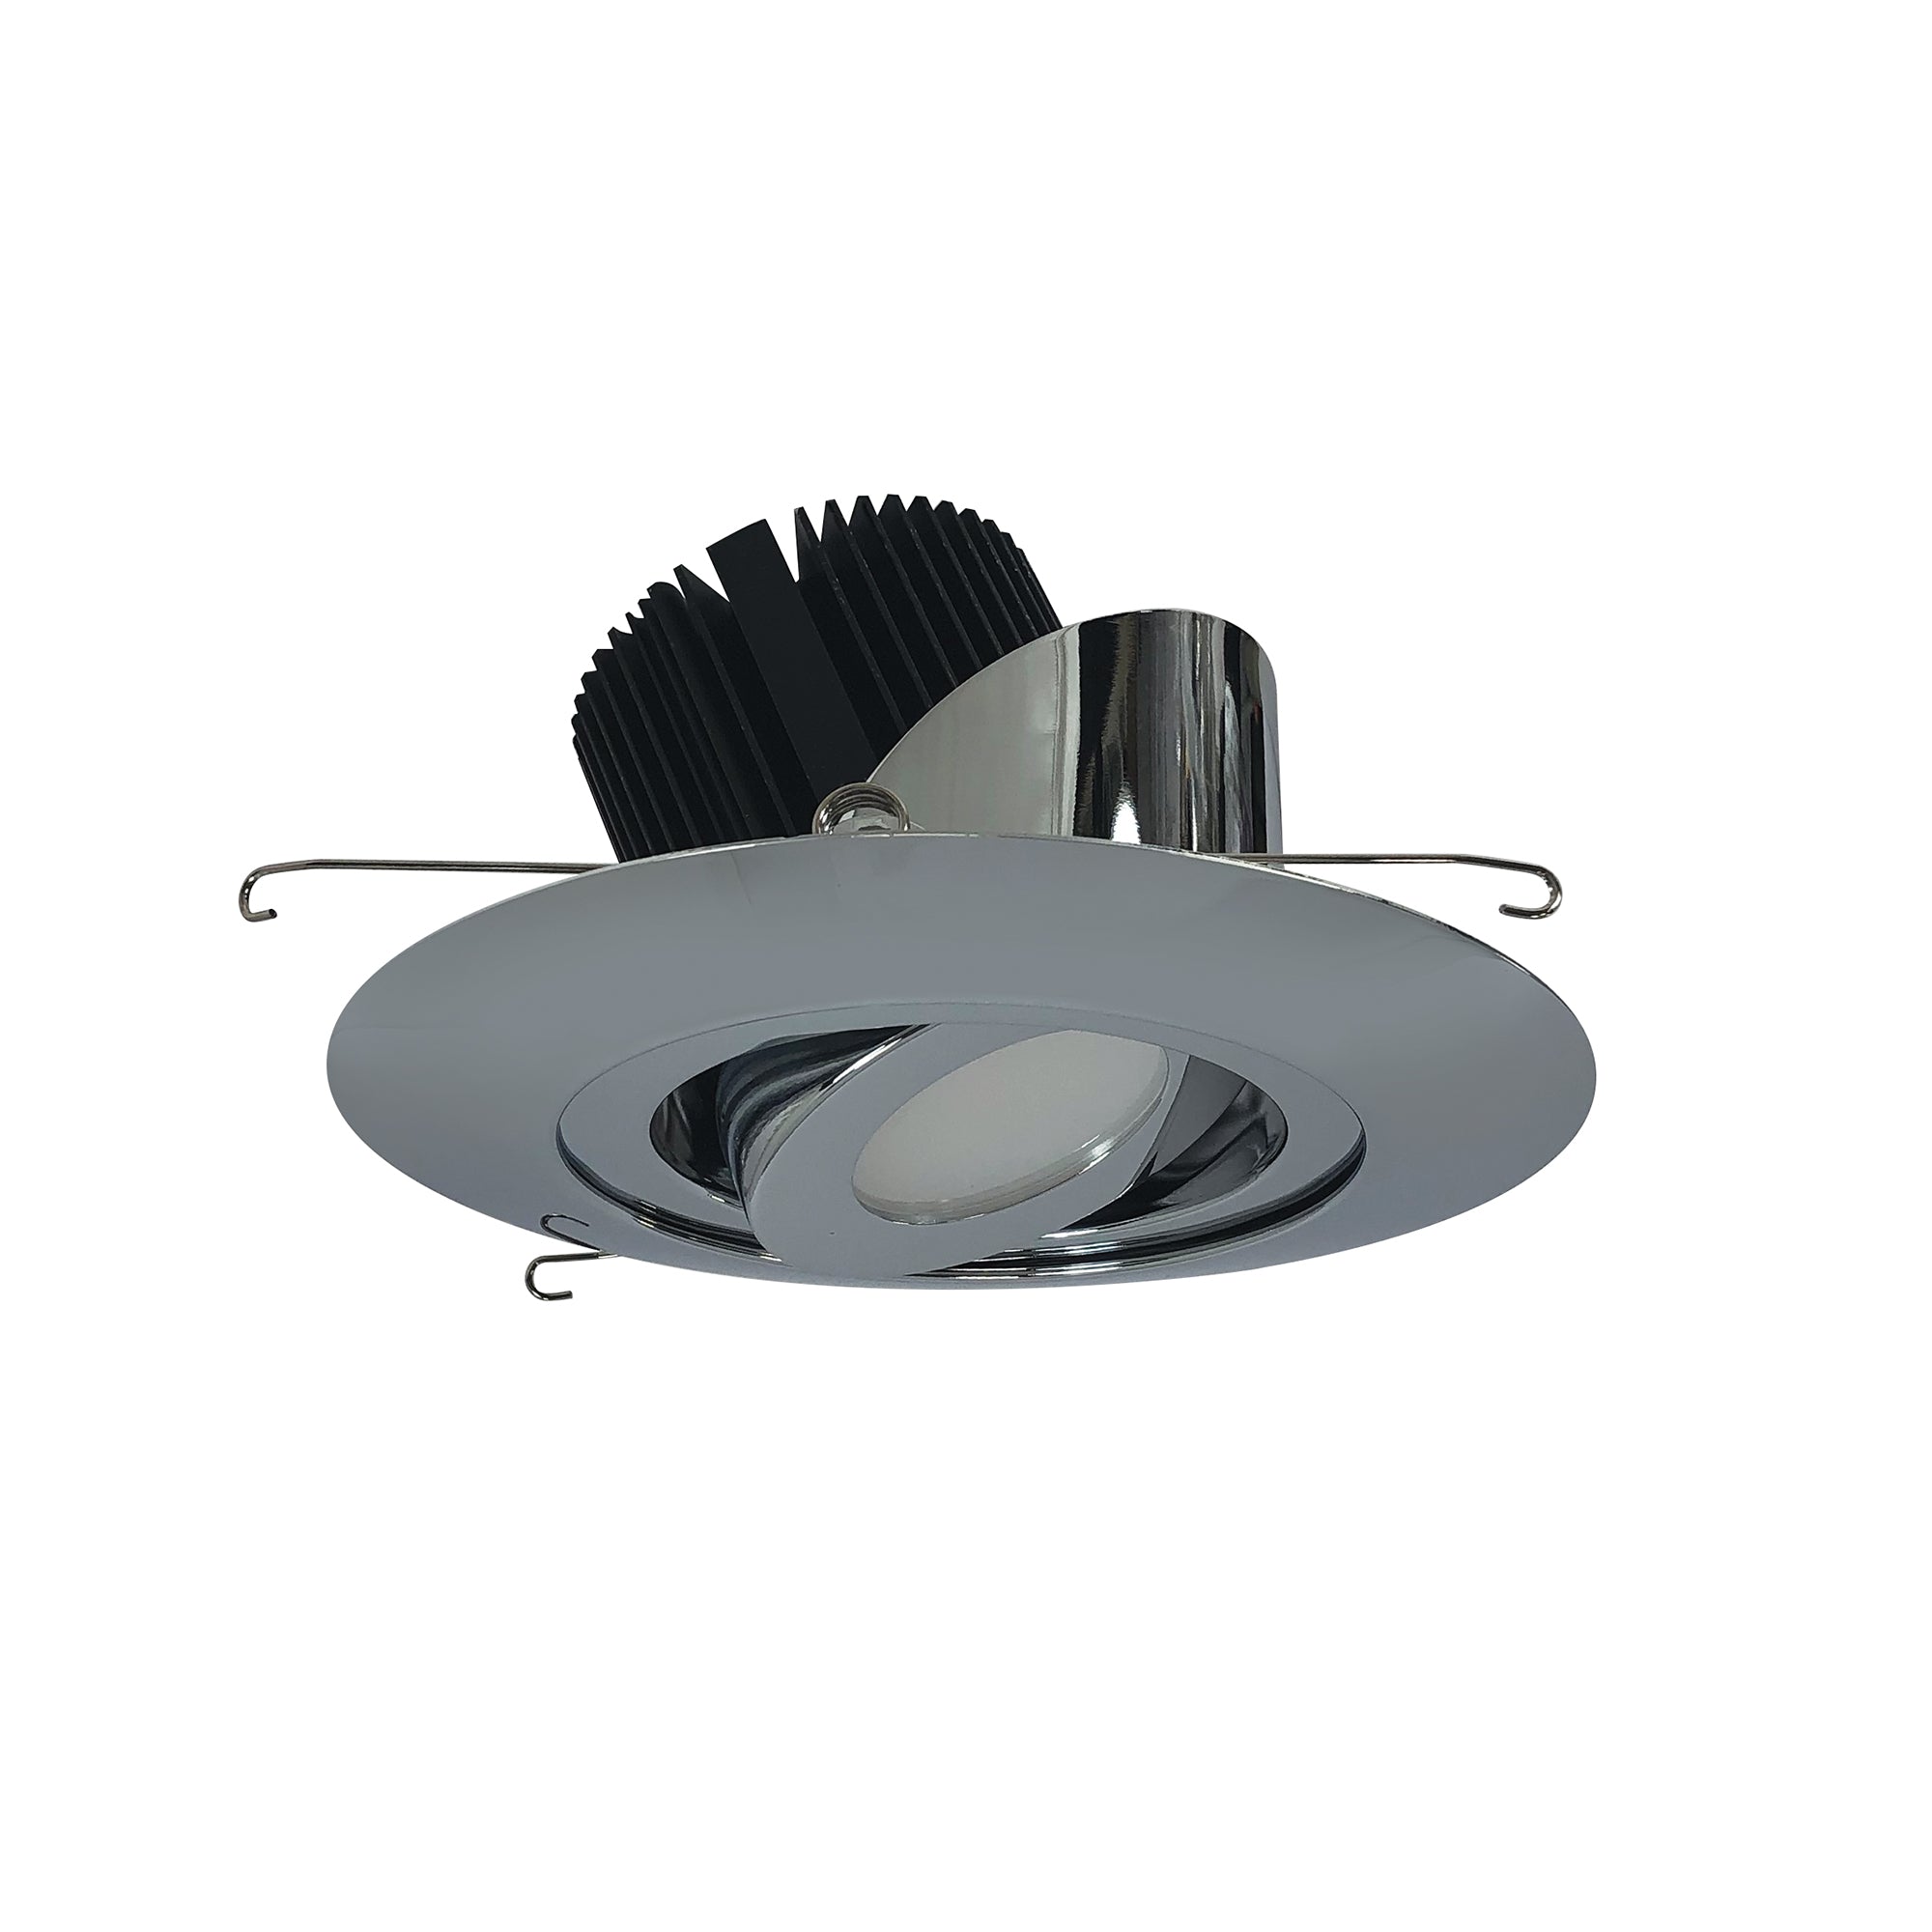 Nora Lighting NRM2-614L2527MC - Recessed - 6 Inch Marquise II Round Surface Adjustable Trim, Medium Flood, 2500lm, 2700K, Chrome (Not Compatible with NHRM2-625 Housings)